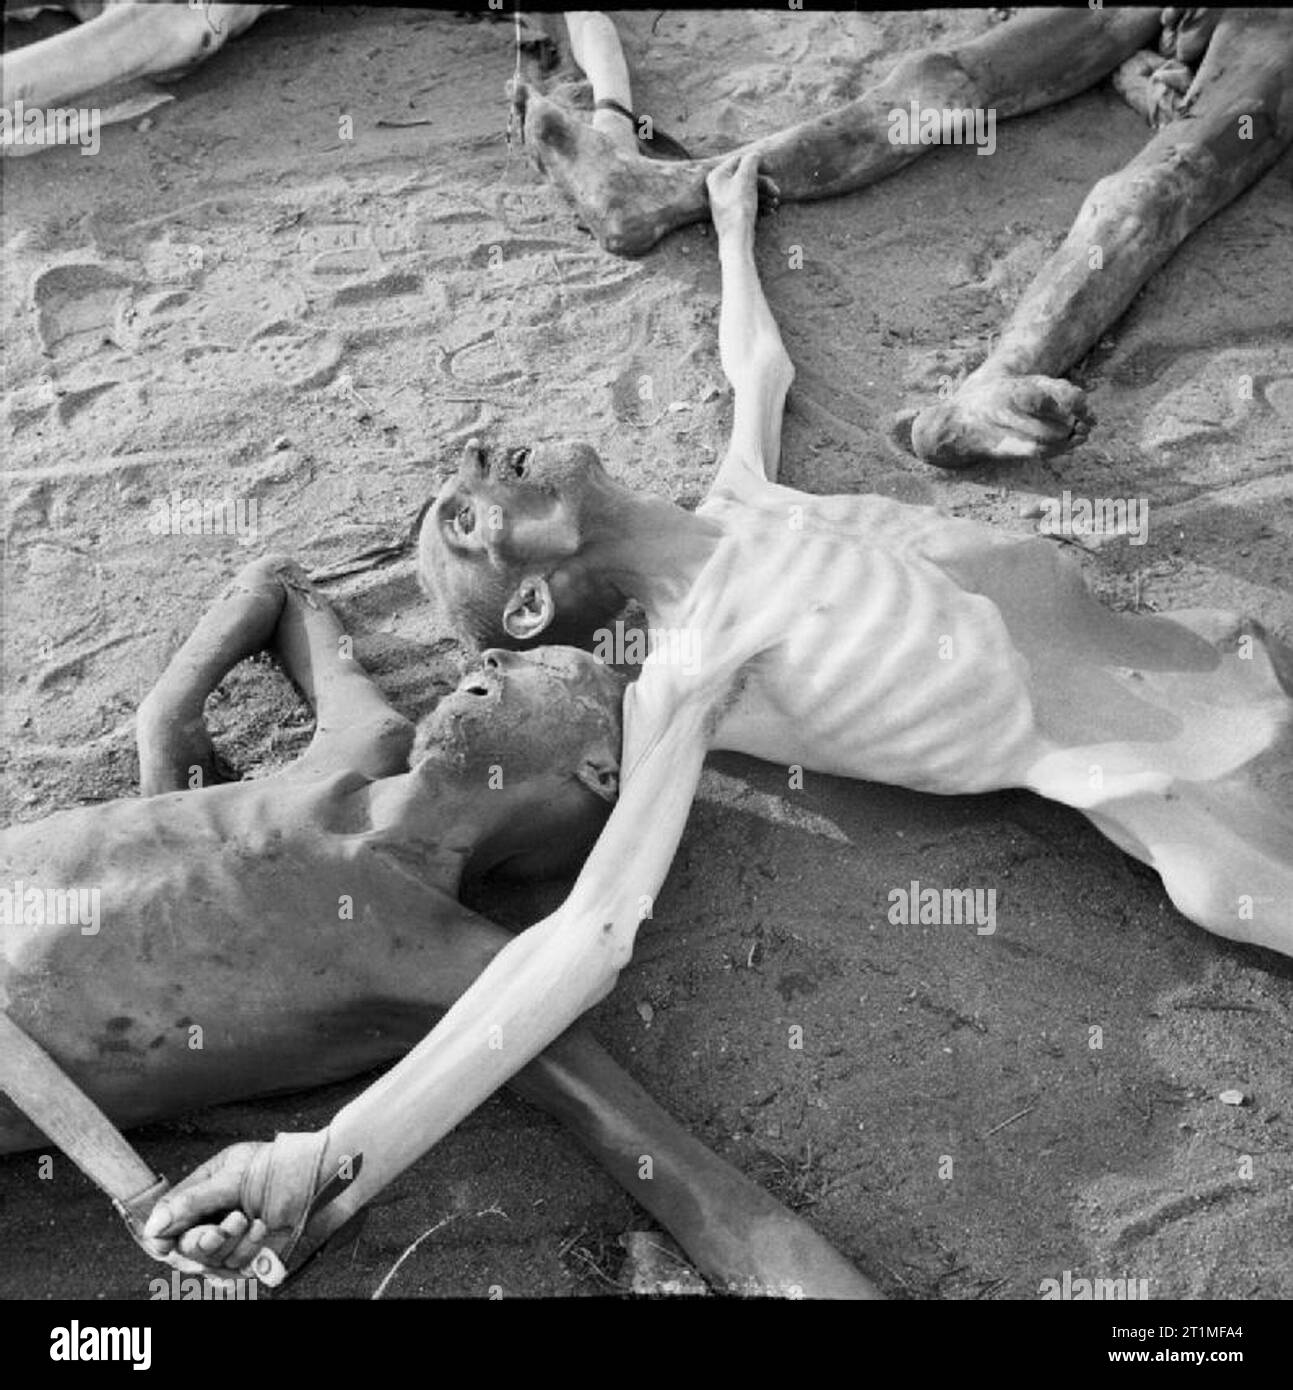 The Liberation of Bergen-belsen Concentration Camp, April 1945 The bodies of victims in Bergen-Belsen concentration camp. Stock Photo